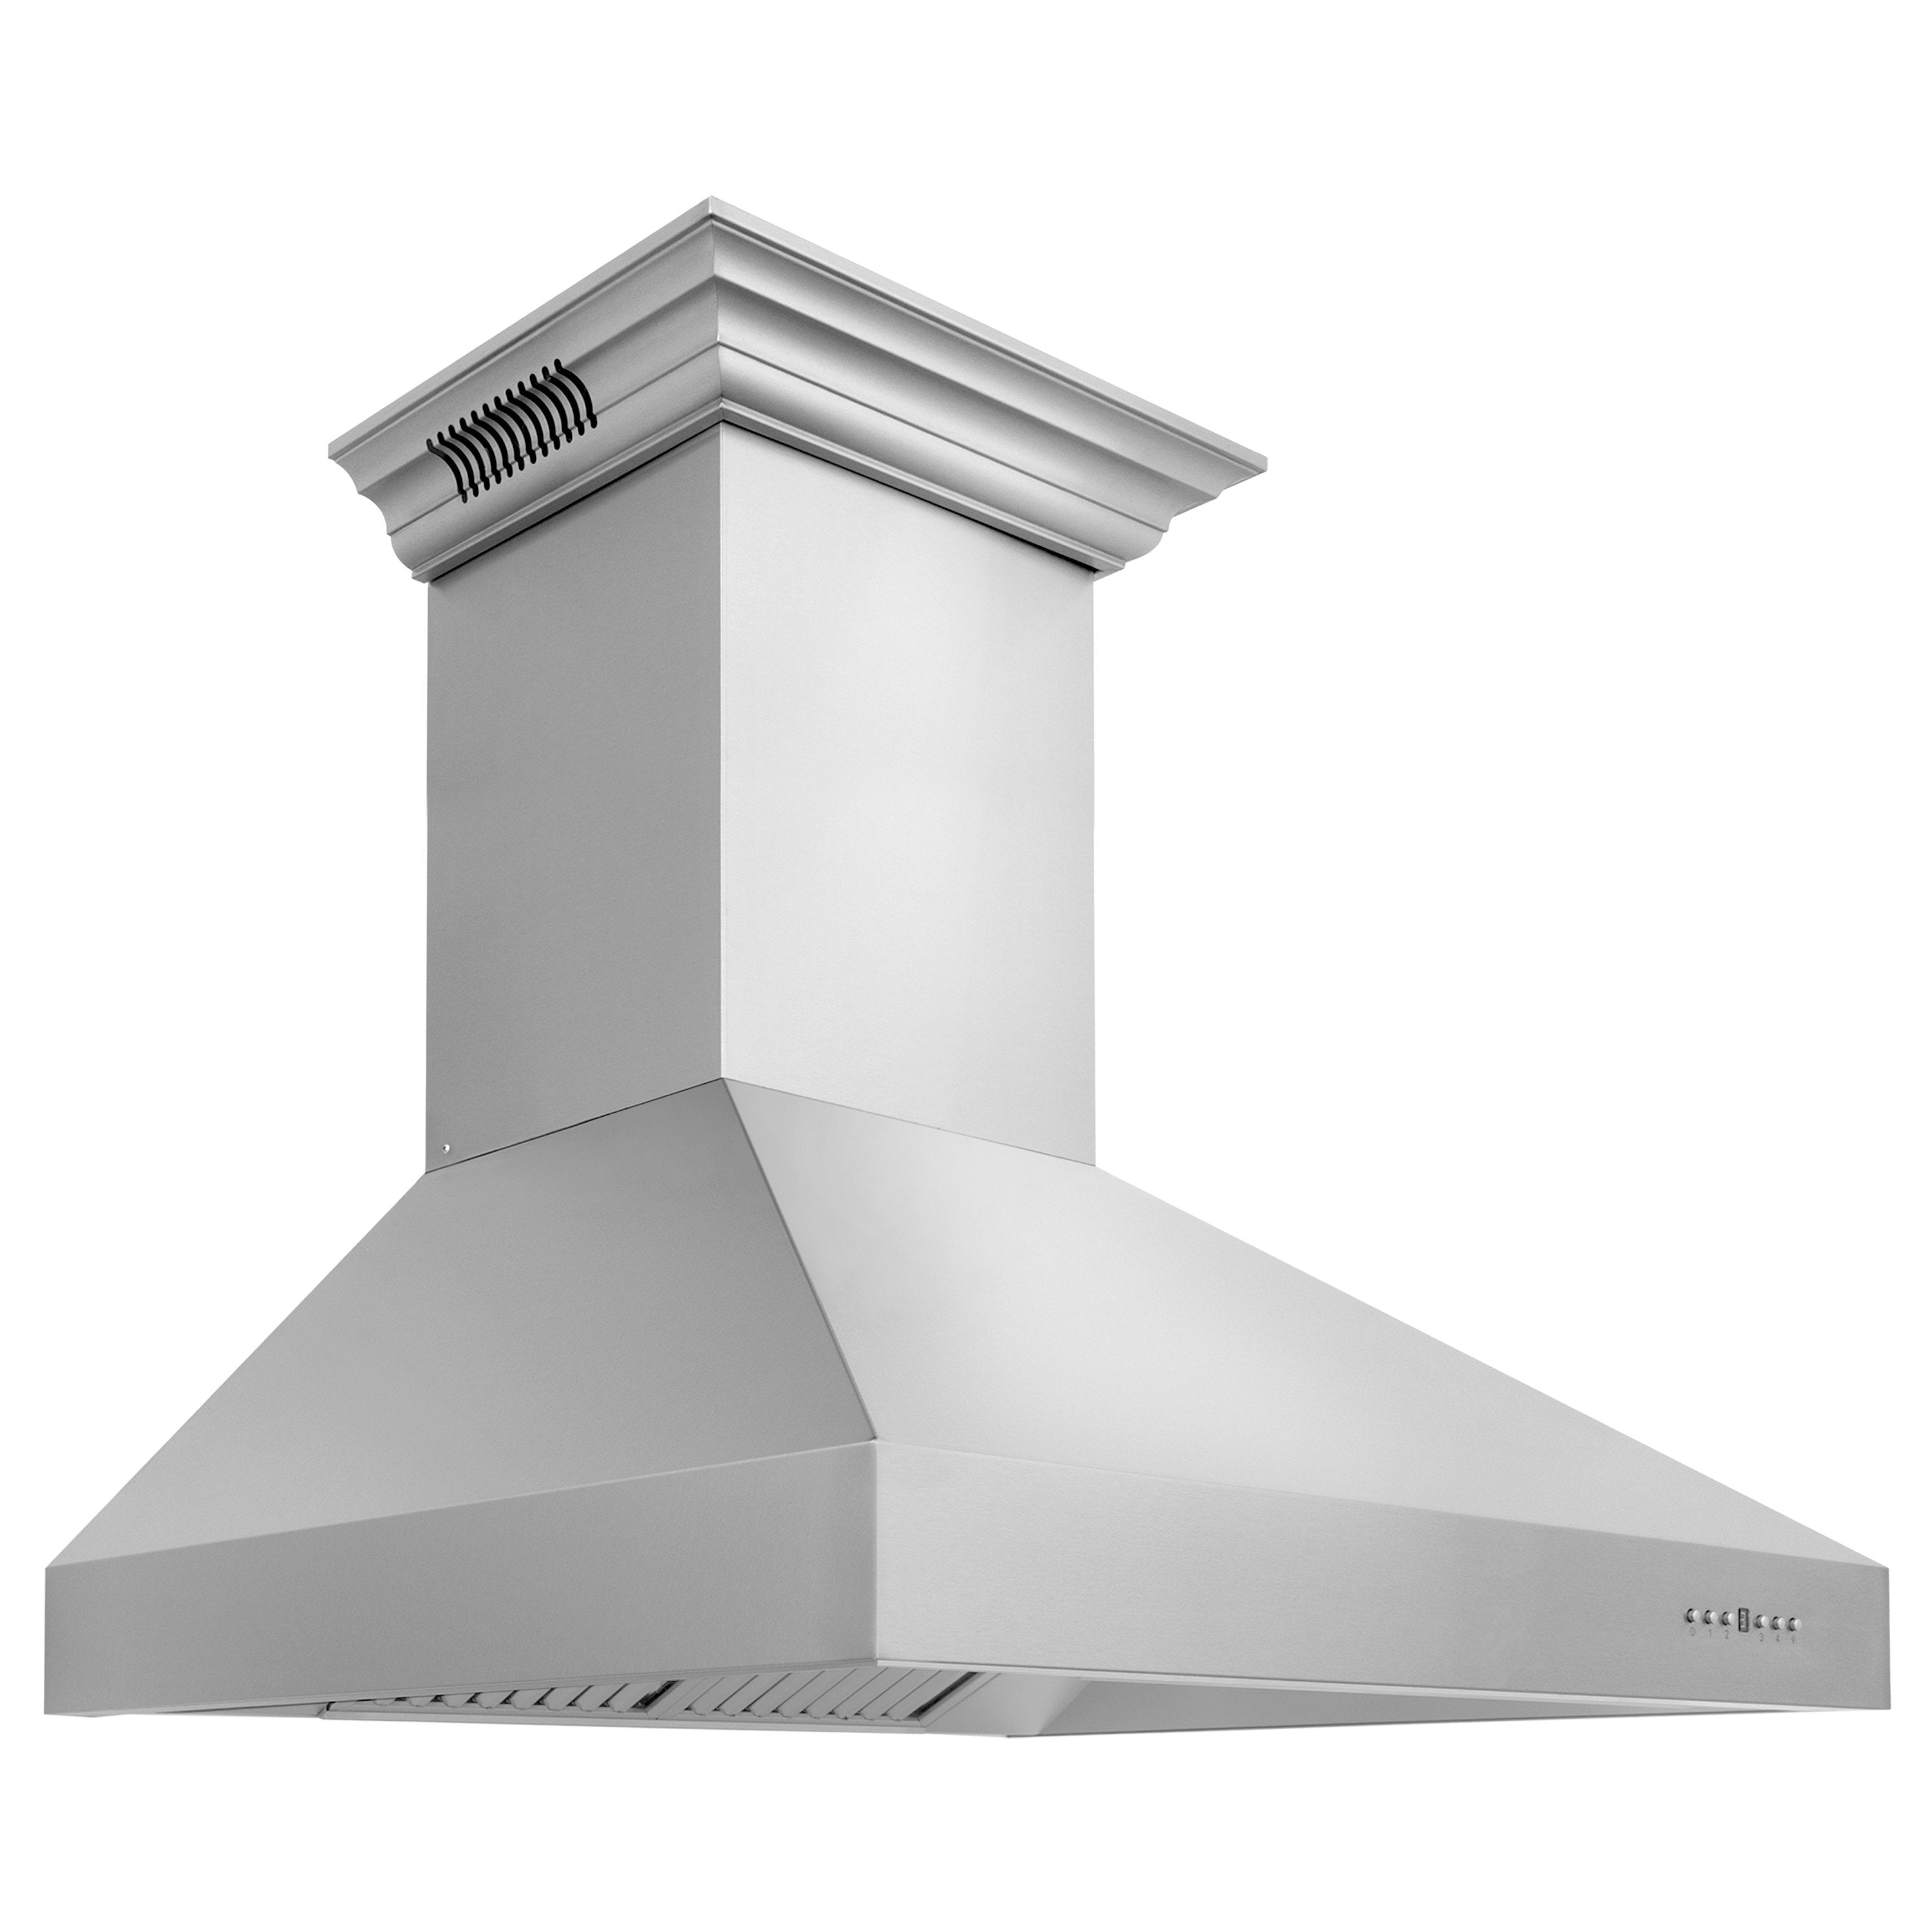 48" ZLINE CrownSound‚ Ducted Vent Professional Wall Mount Range Hood in Stainless Steel with Built-in Bluetooth Speakers (697CRN-BT-48)